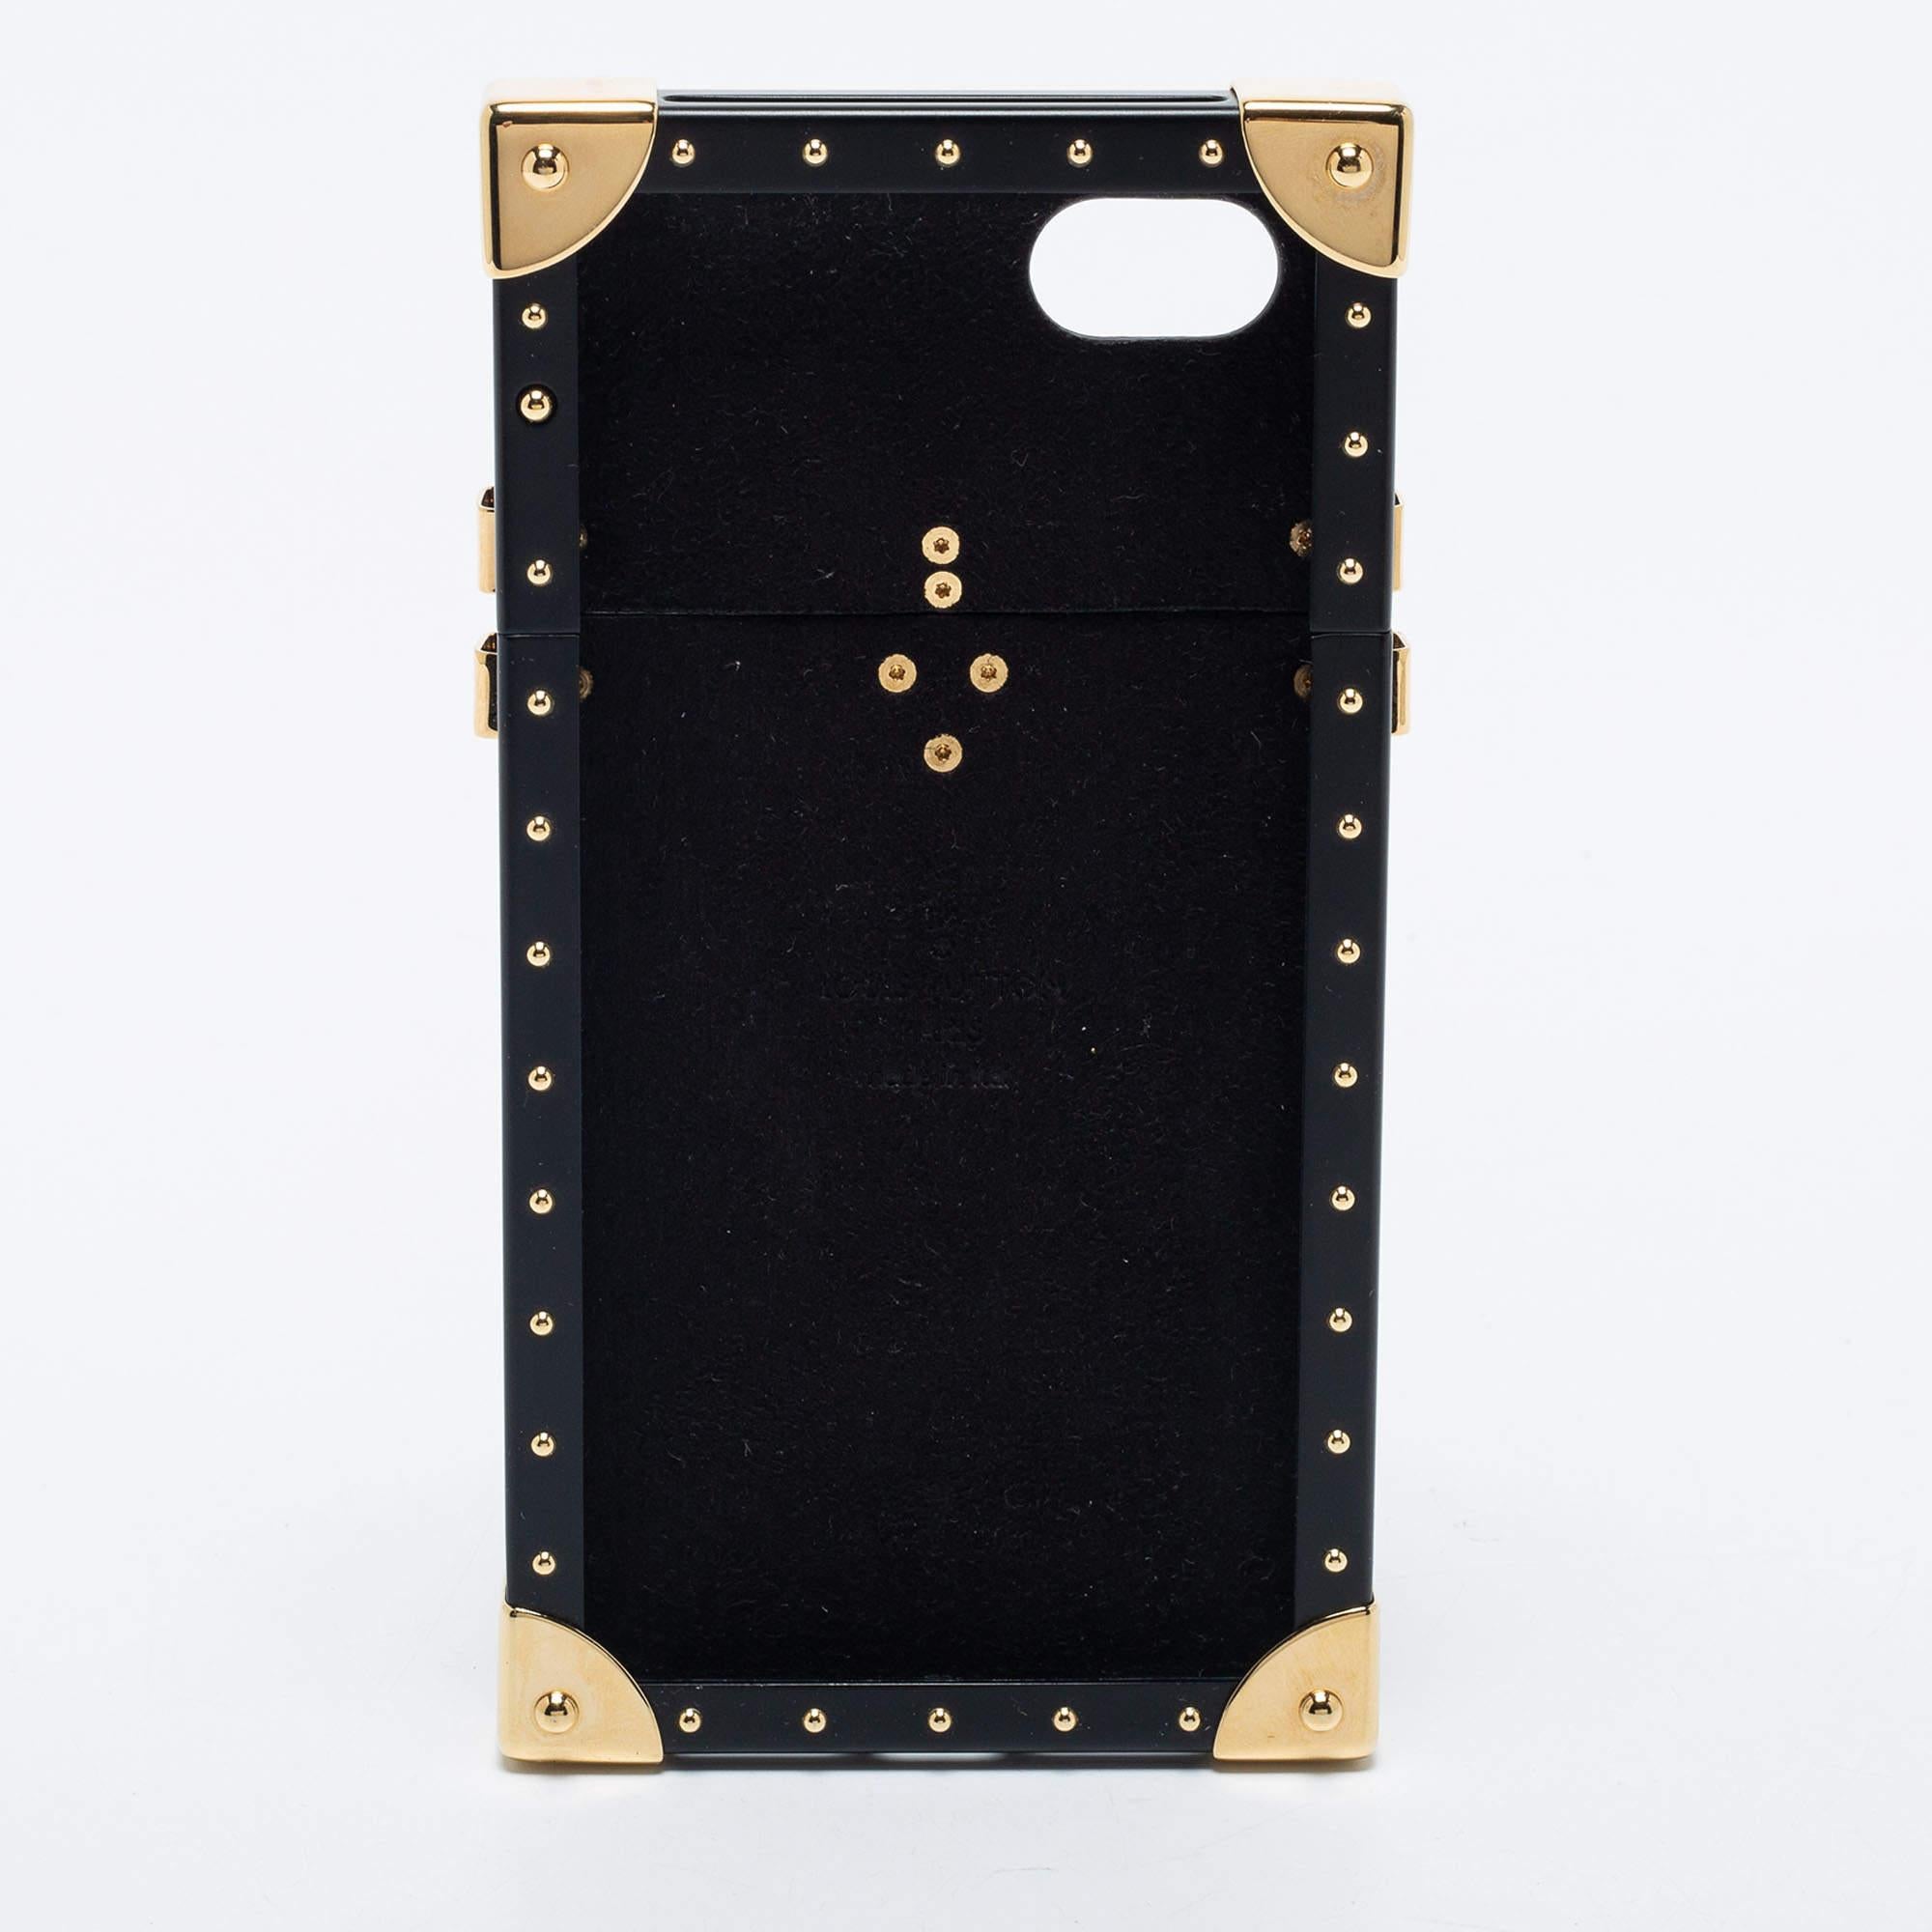 What's not to love about accessories that can both be flaunted and functional? To protect your iPhone 7, this stunning Louis Vuitton case has been crafted from Monogram Reverse canvas and styled to resemble their famous trunk designs. It has